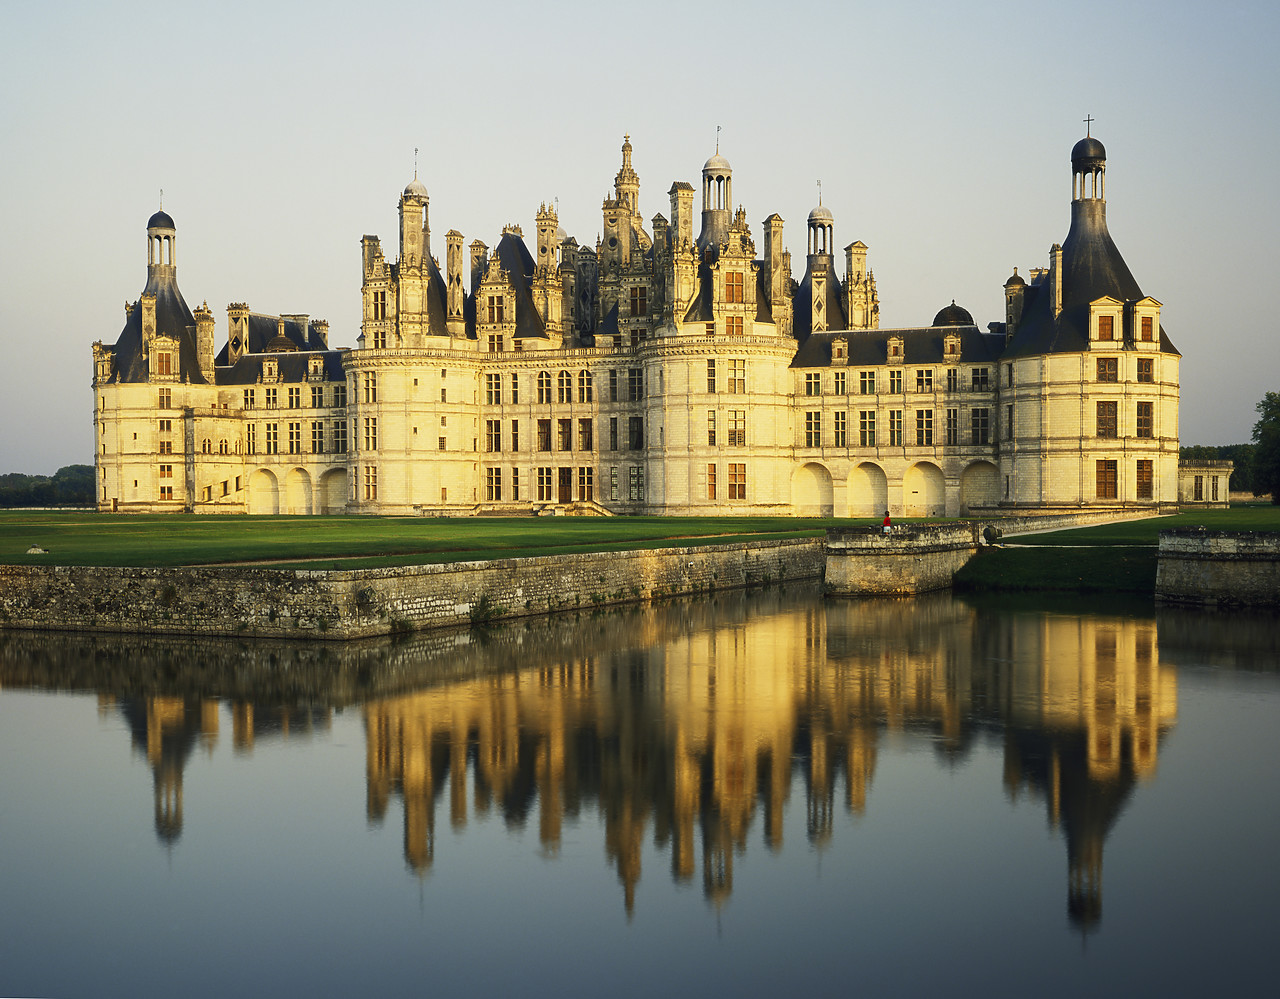 #871075 - Chateau Chambord, Loire Valley, France